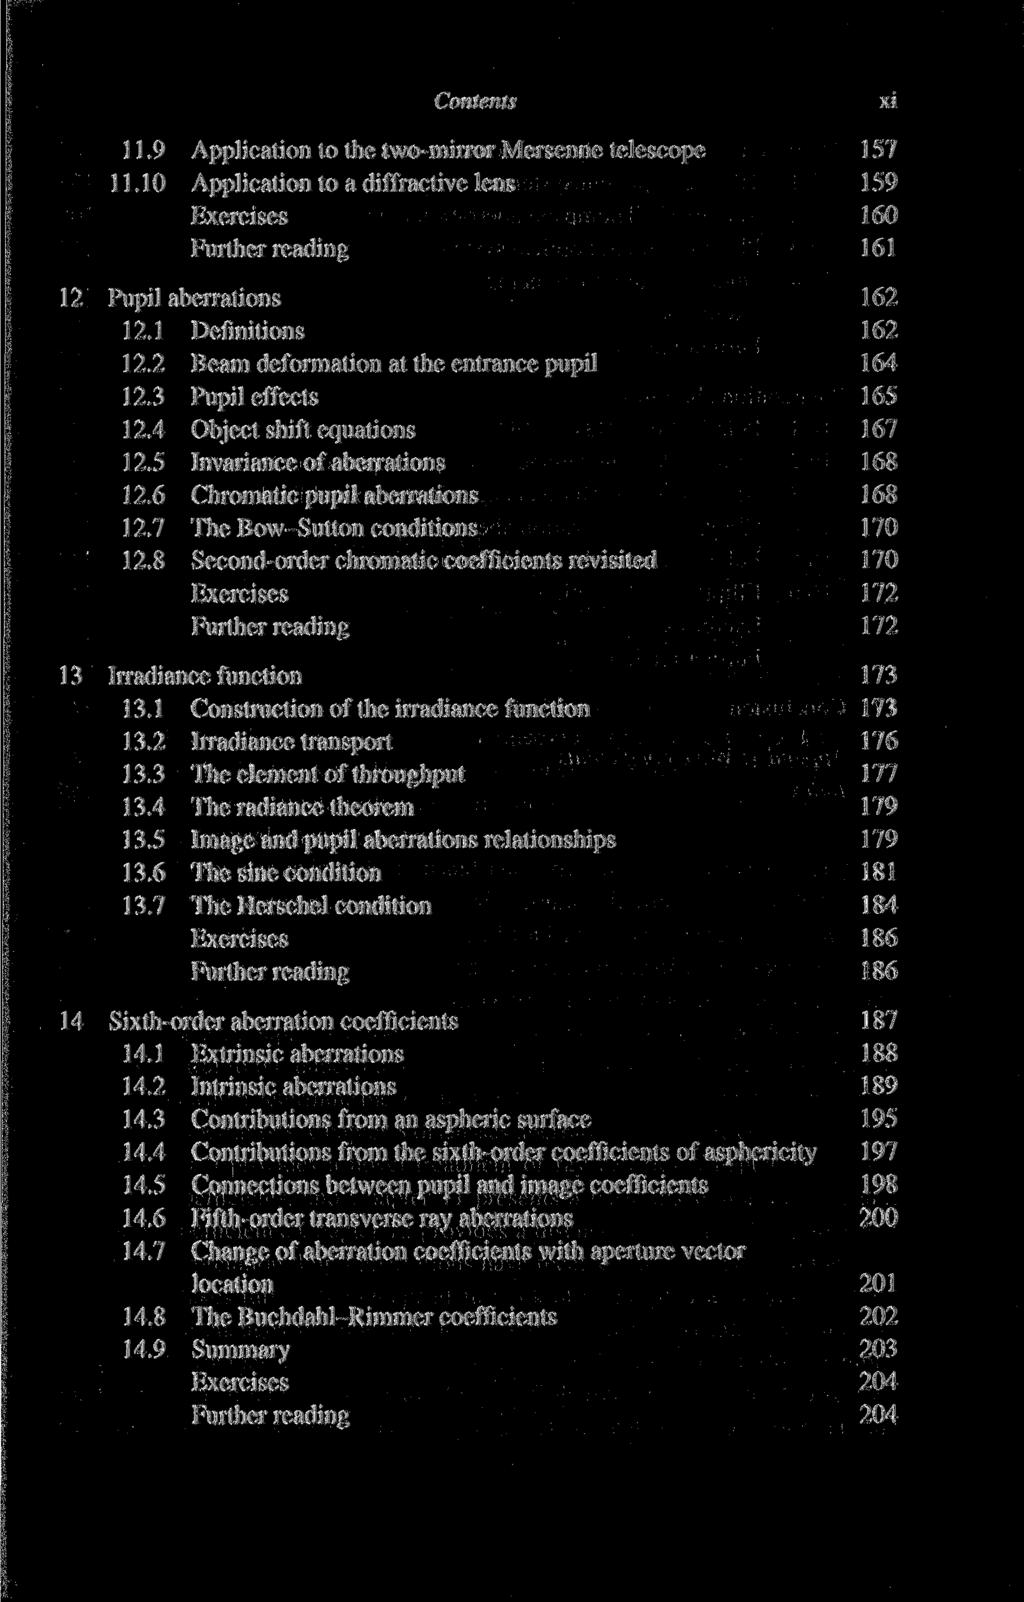 Contents 11.9 Application to the two-mirror Mersenne telescope 157 11.10 Application to a diffractive lens 159 Exercises 160 Further reading 161 12 Pupil aberrations 162 12.1 Definitions 162 12.